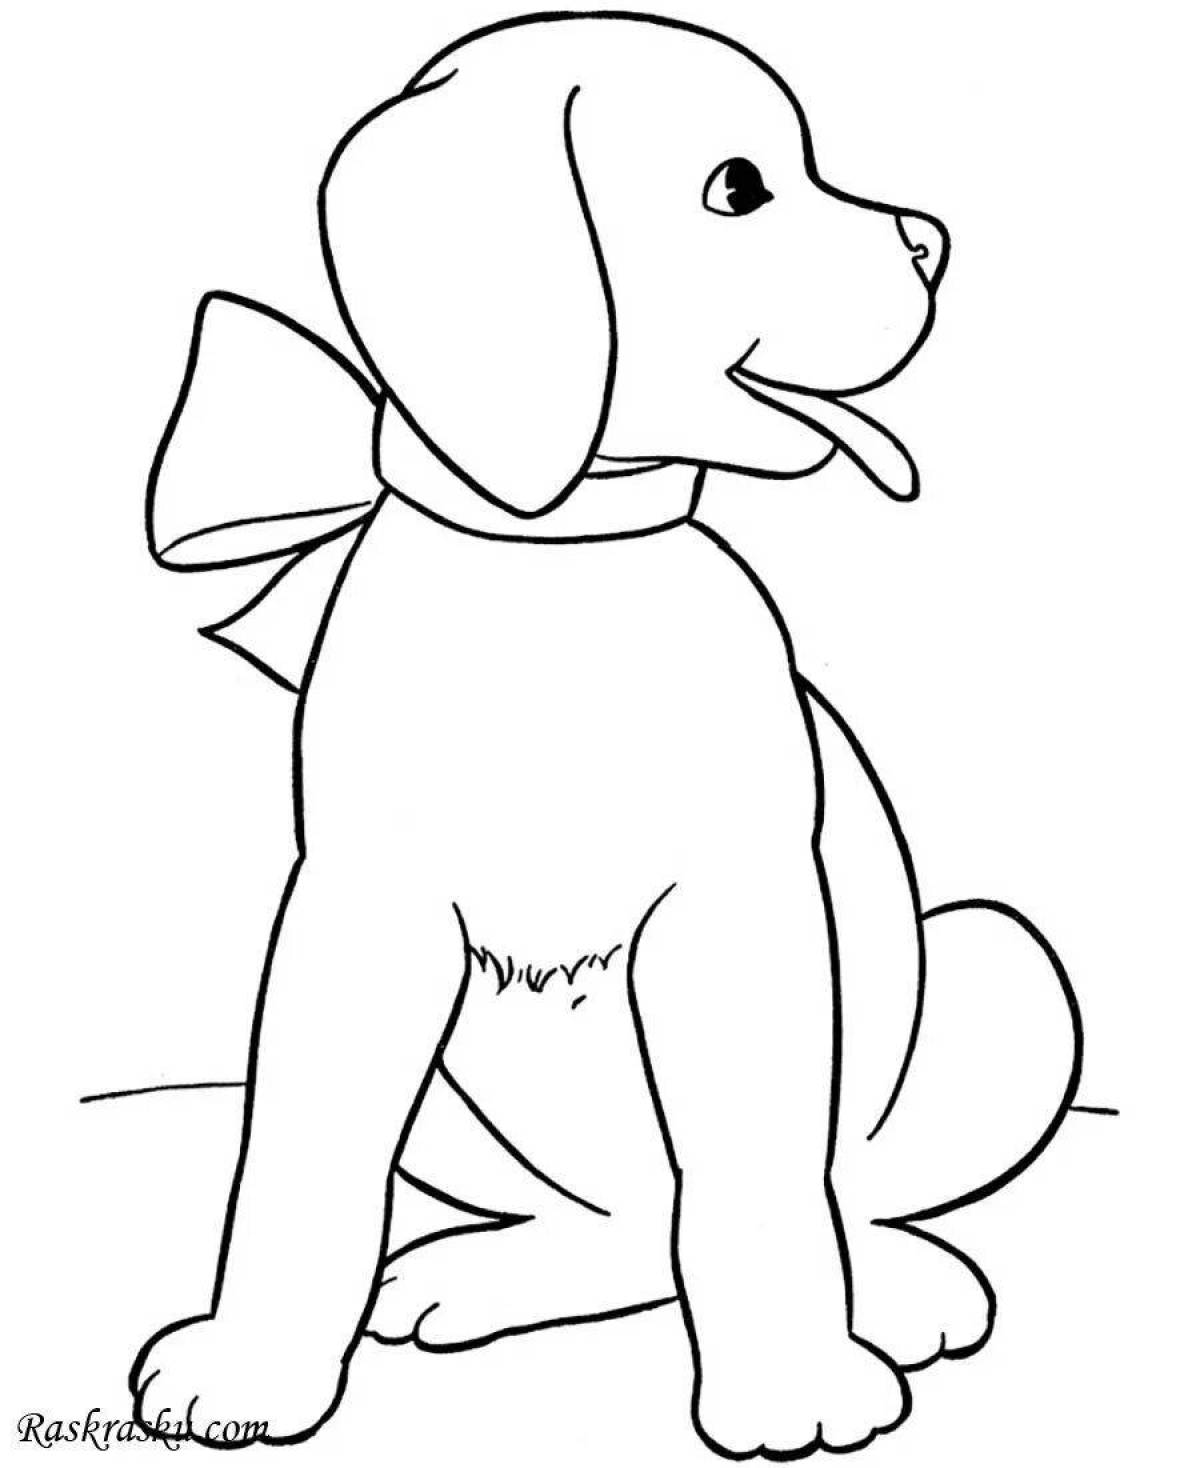 Great dog coloring book for kids